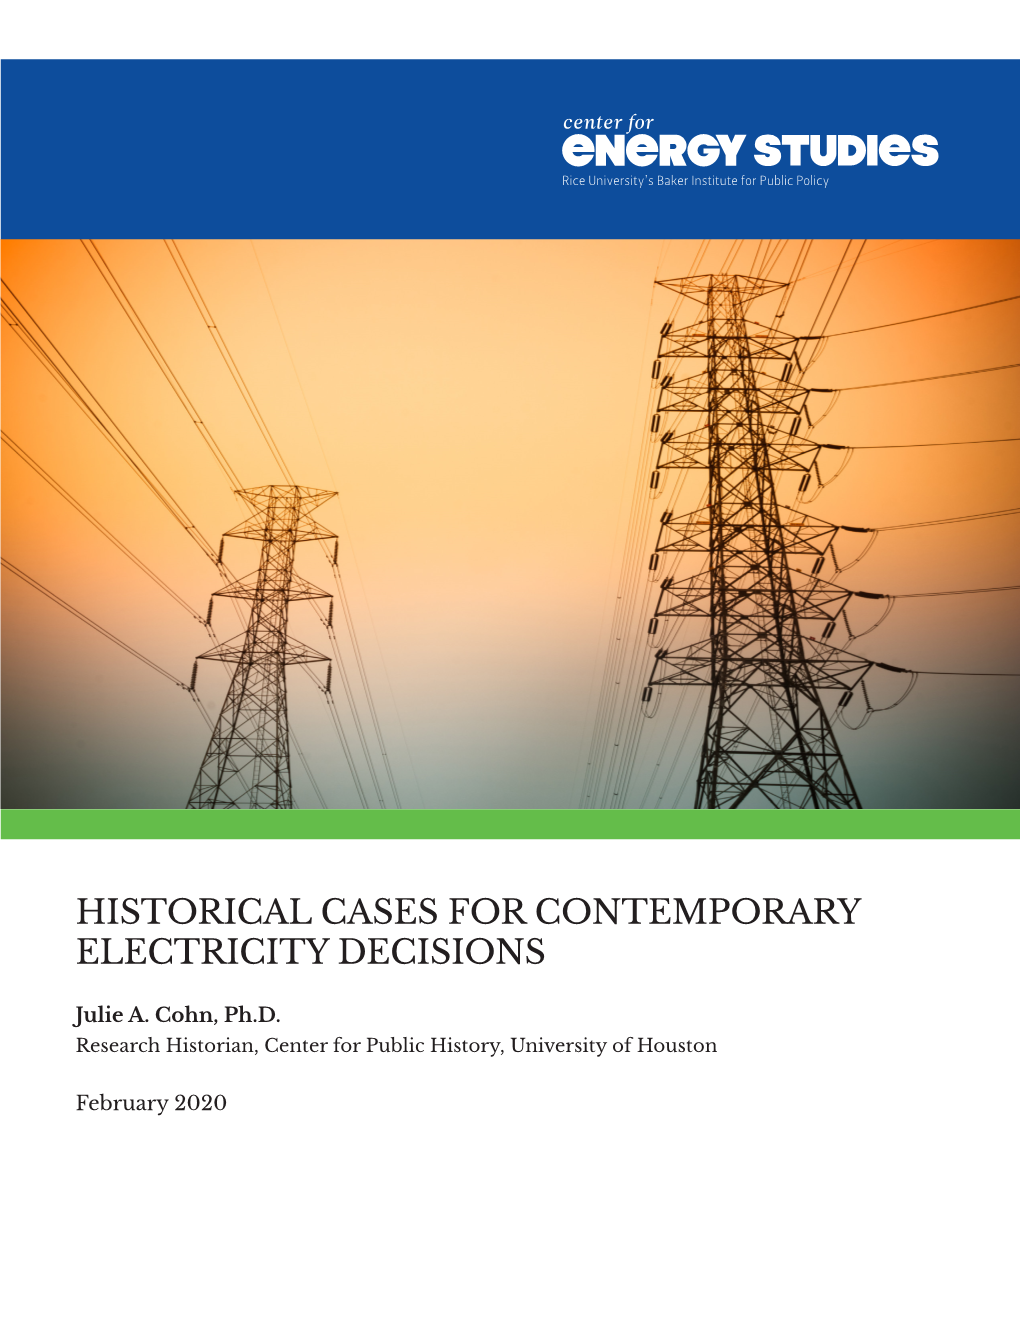 Historical Cases for Contemporary Electricity Decisions